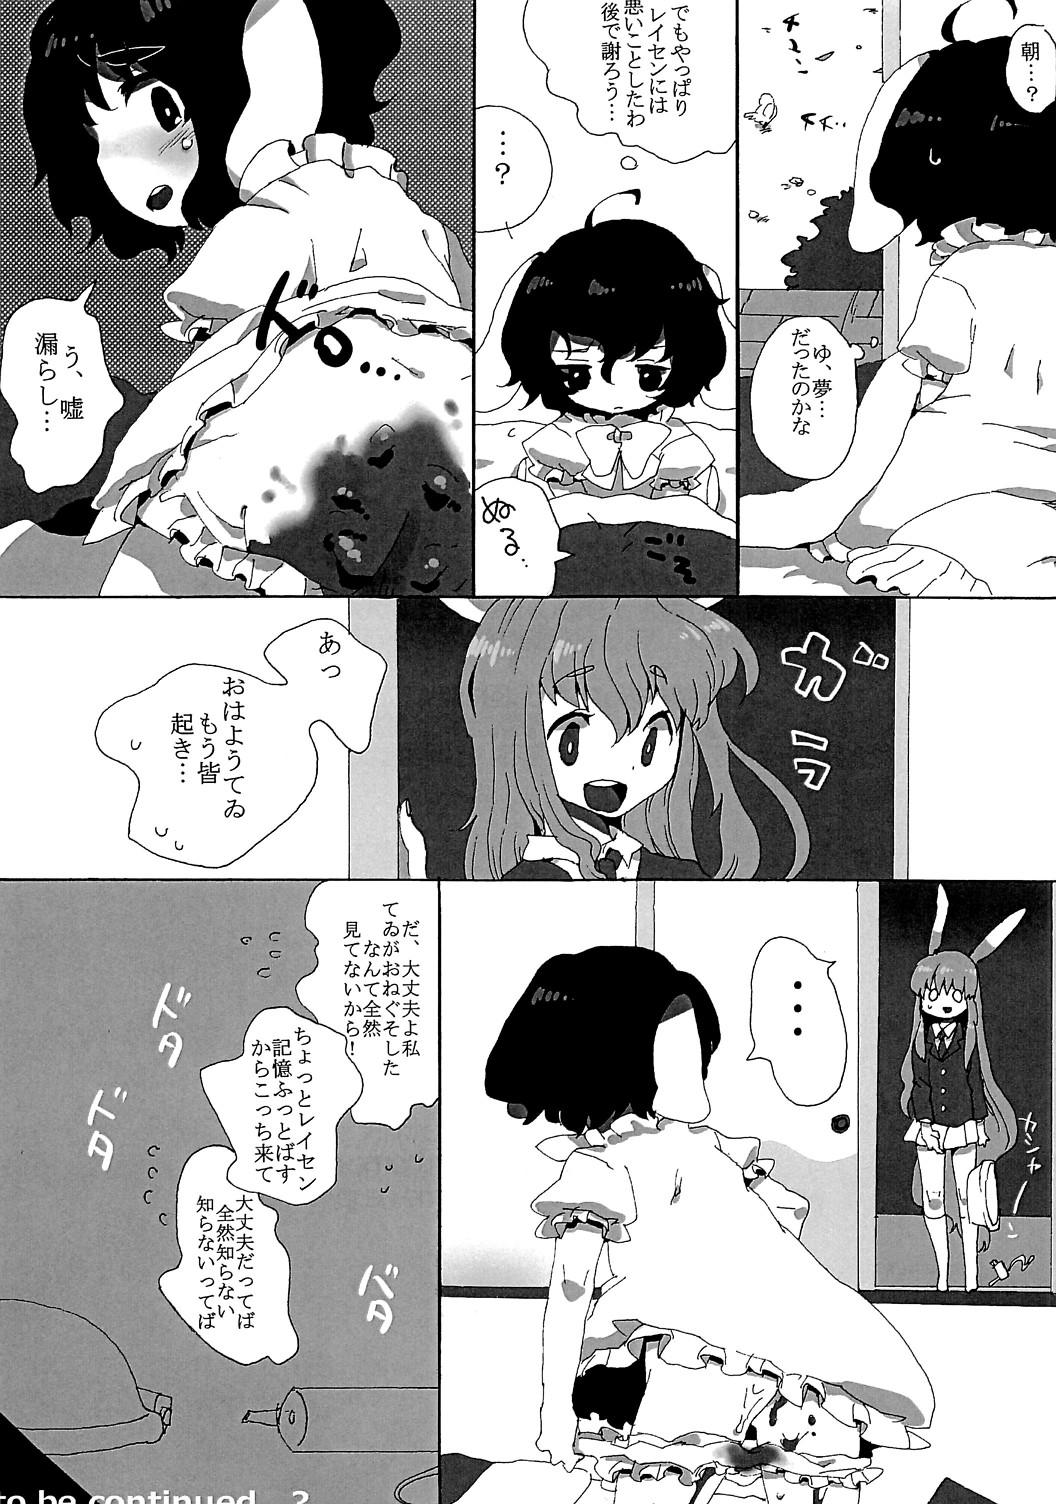 Novia rumor the second - Touhou project Japanese - Page 12